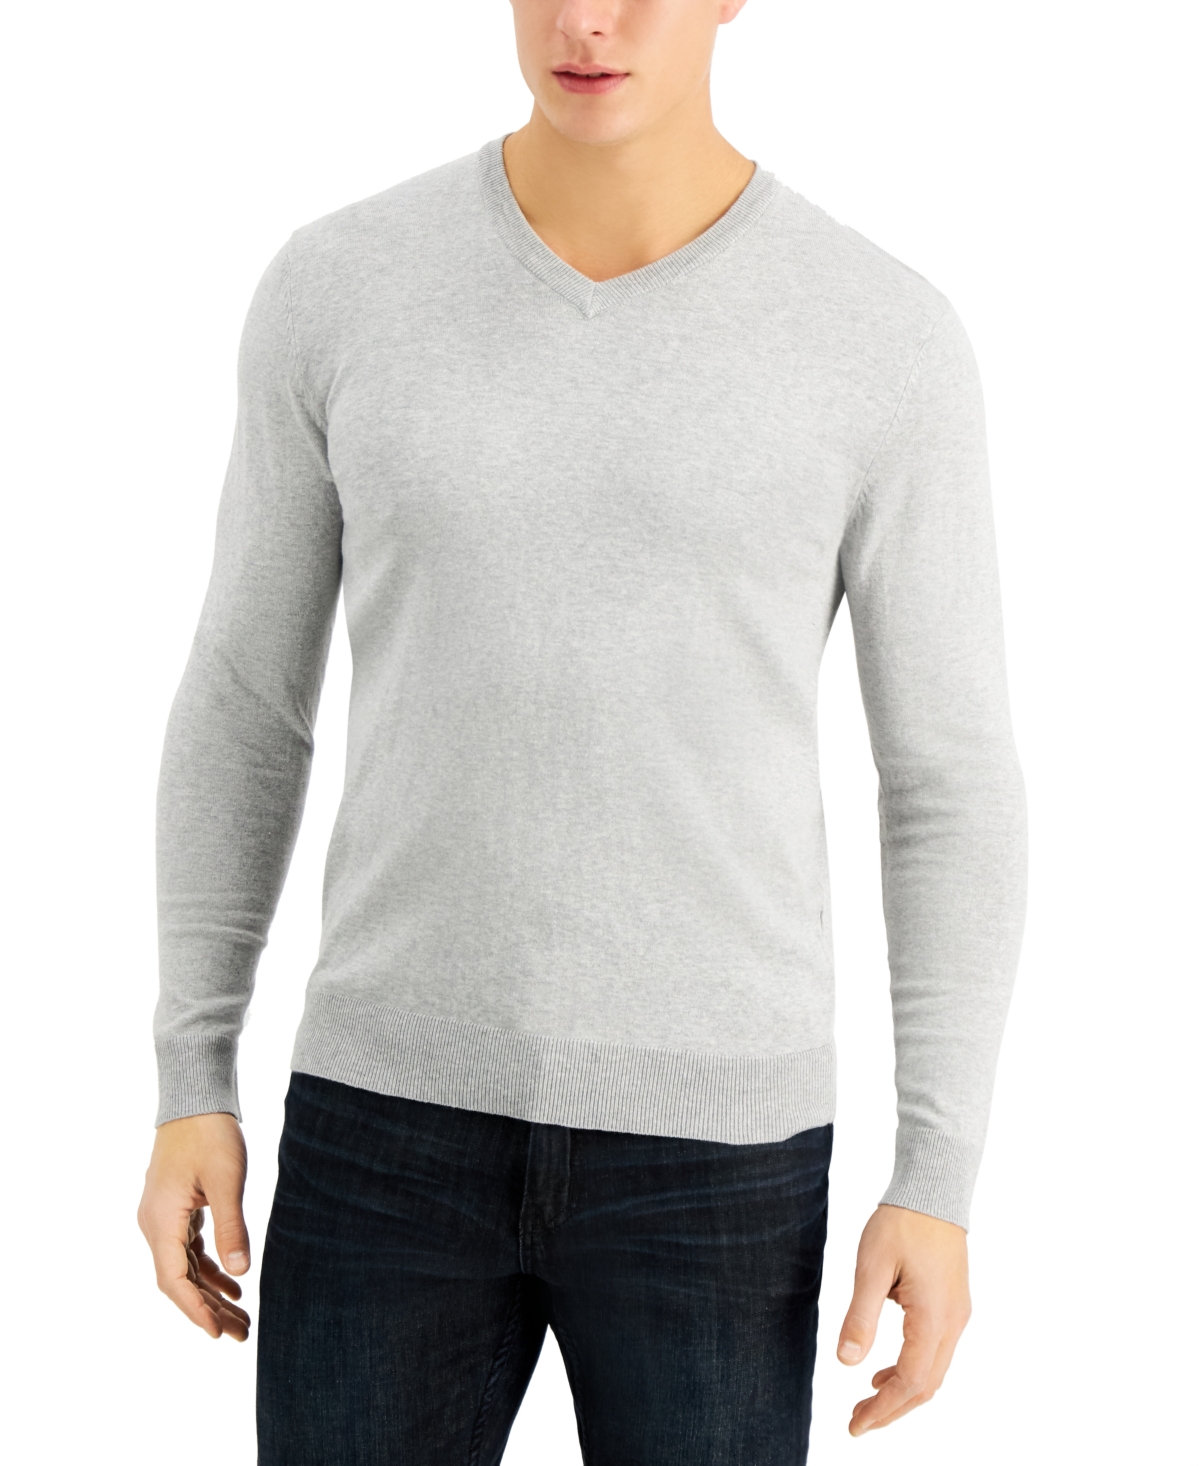 Men's Solid V-Neck Cotton Sweater, Created for Macy's - Casual Grey Heather